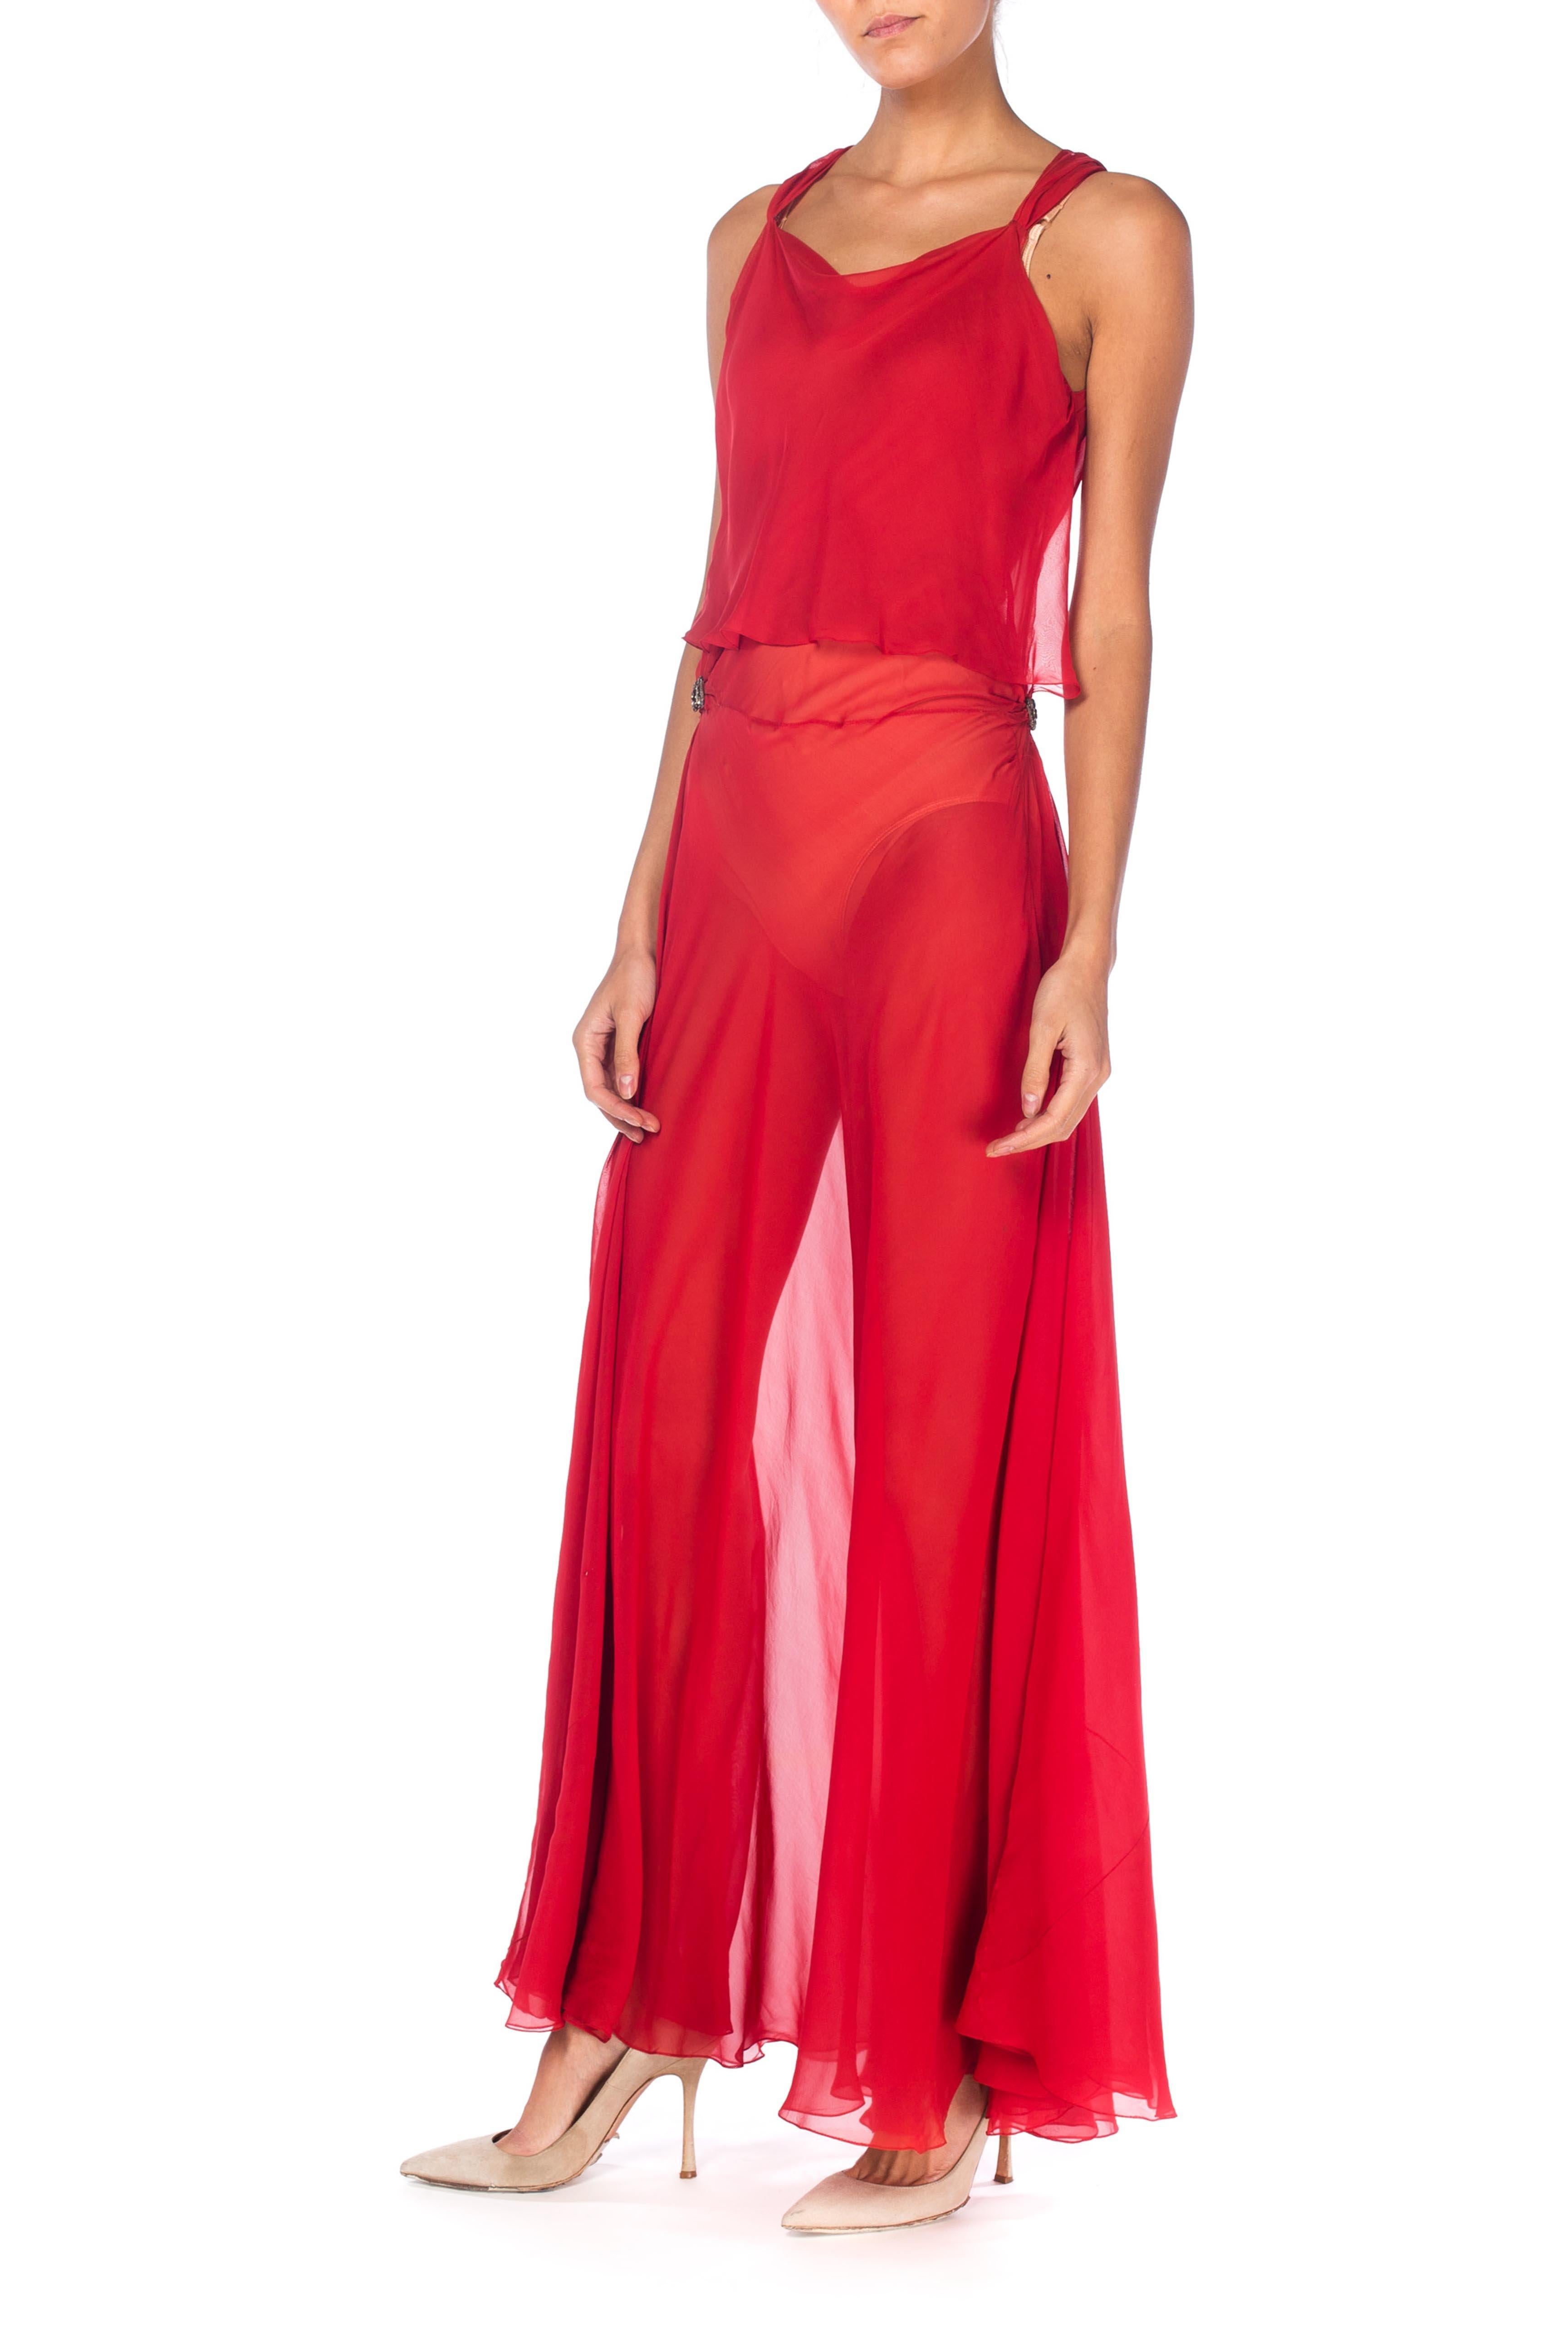 Women's 1930S Red Sheer Silk Chiffon Bias-Cut Gown With Deco Clasps On Hips For Sale